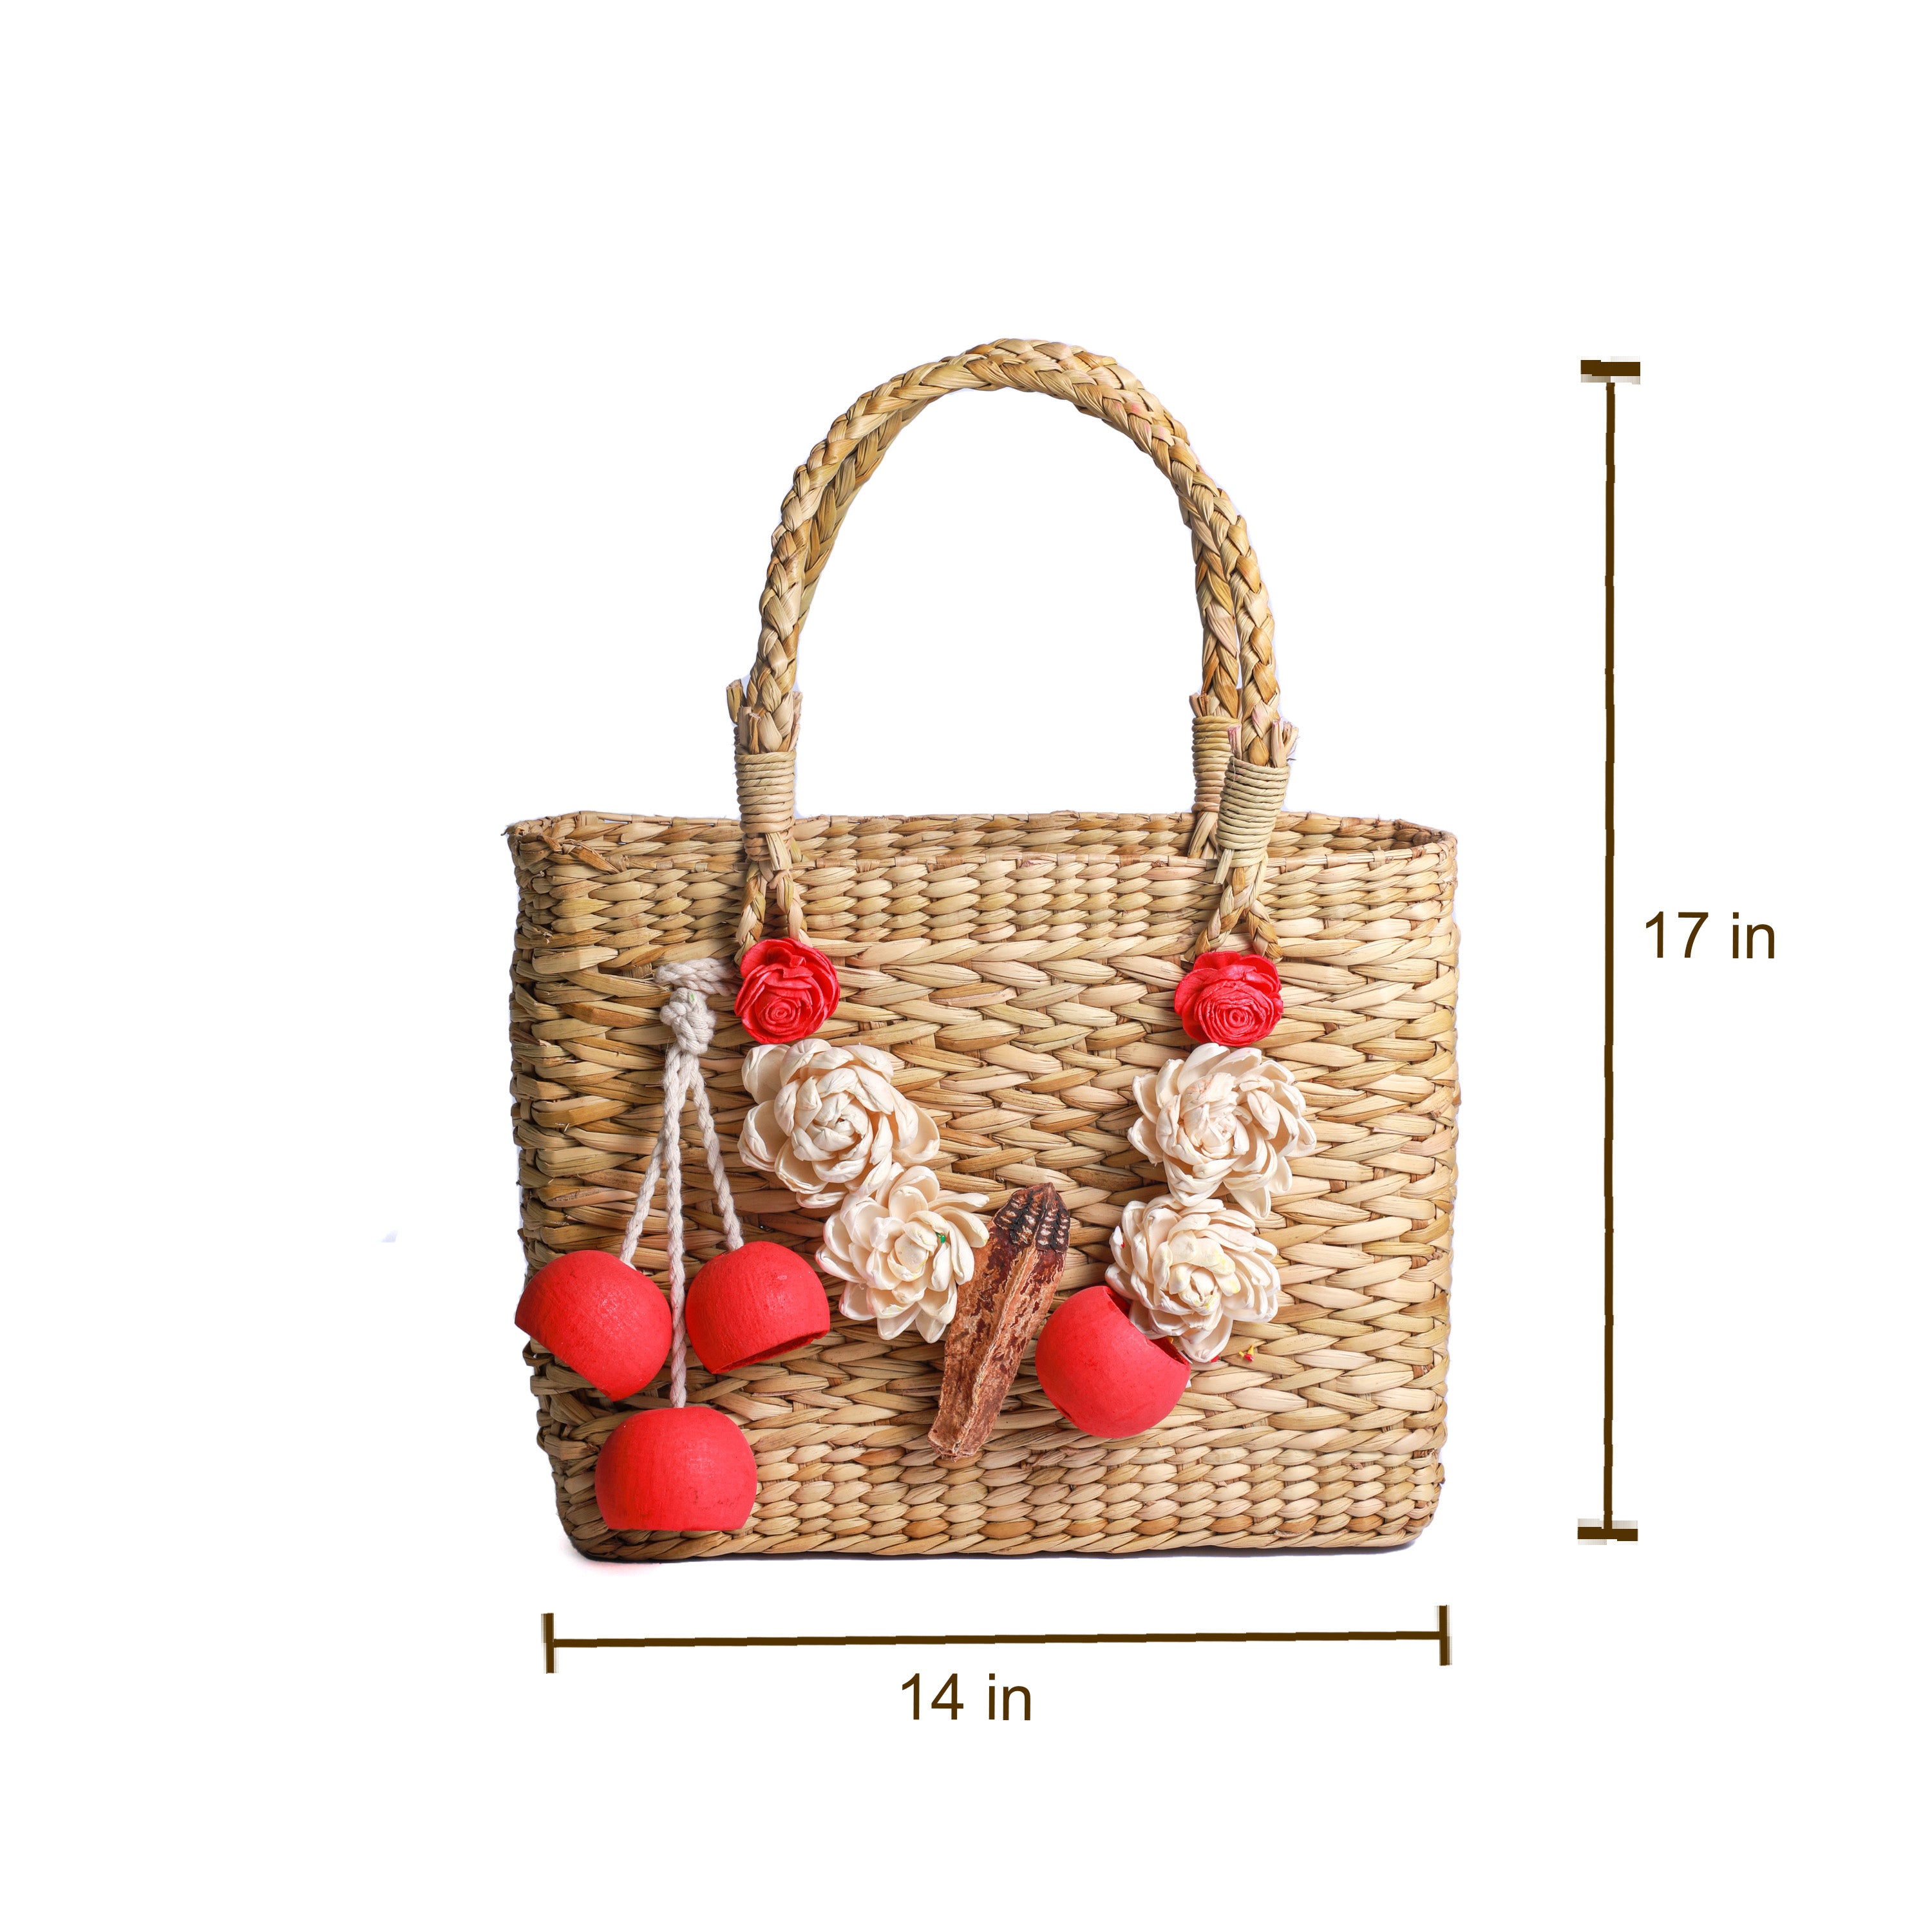 Medium size grass woven basket for gifting in the USA